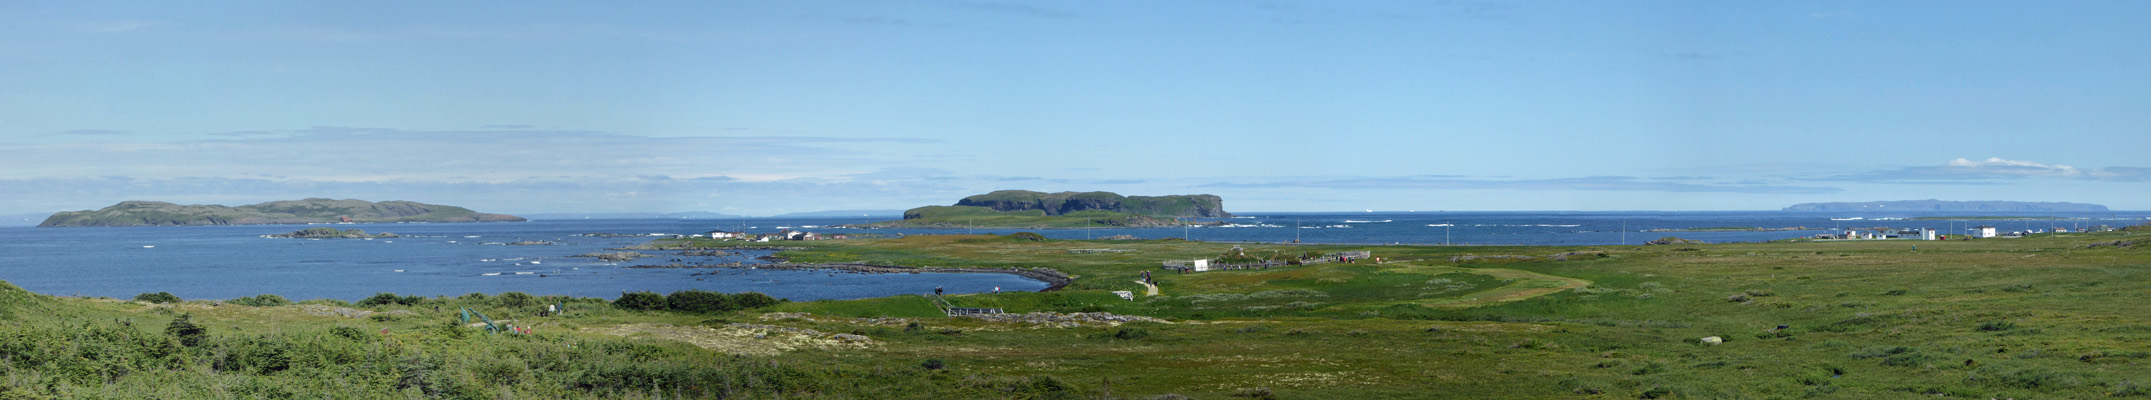 L'Anse aux Meadows panorama